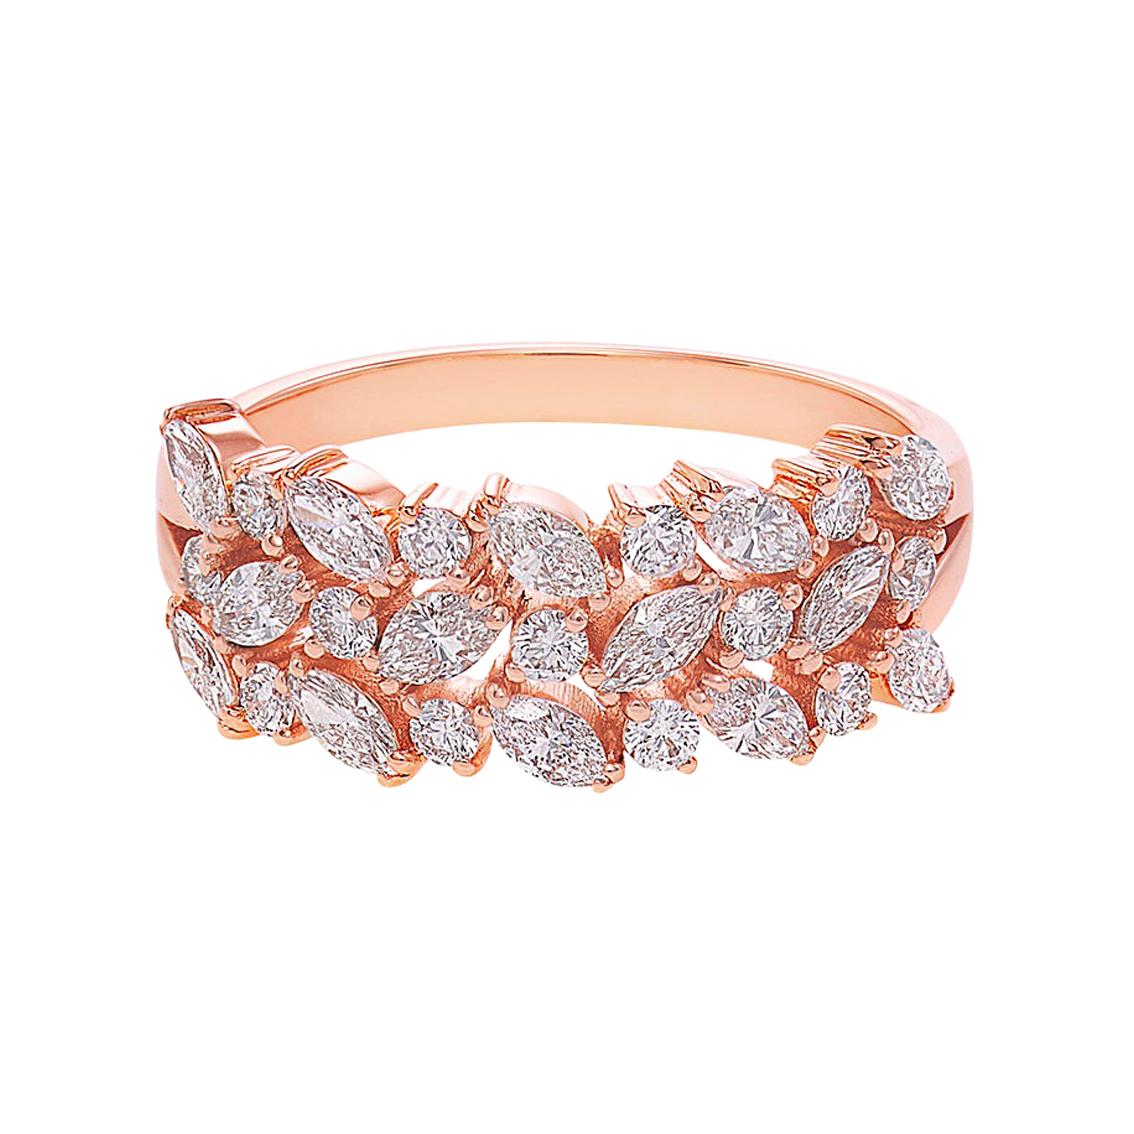 For Sale:  Three Rows Marquise Cut Diamond Unique Wedding Ring Band 18k Rose Gold